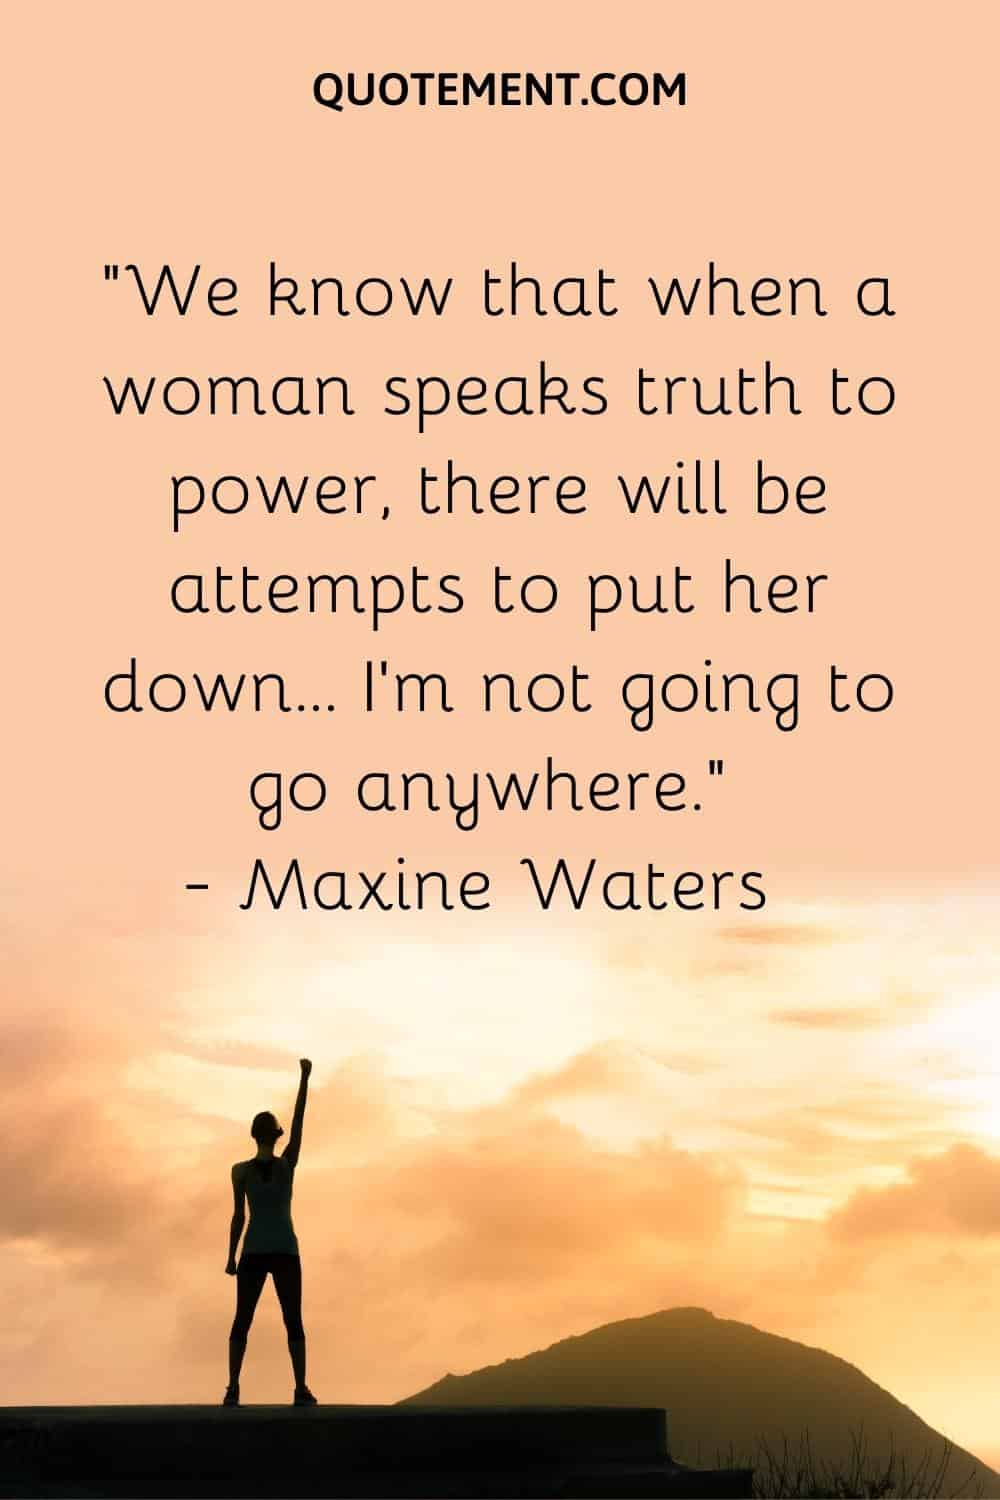 We know that when a woman speaks truth to power, there will be attempts to put her down